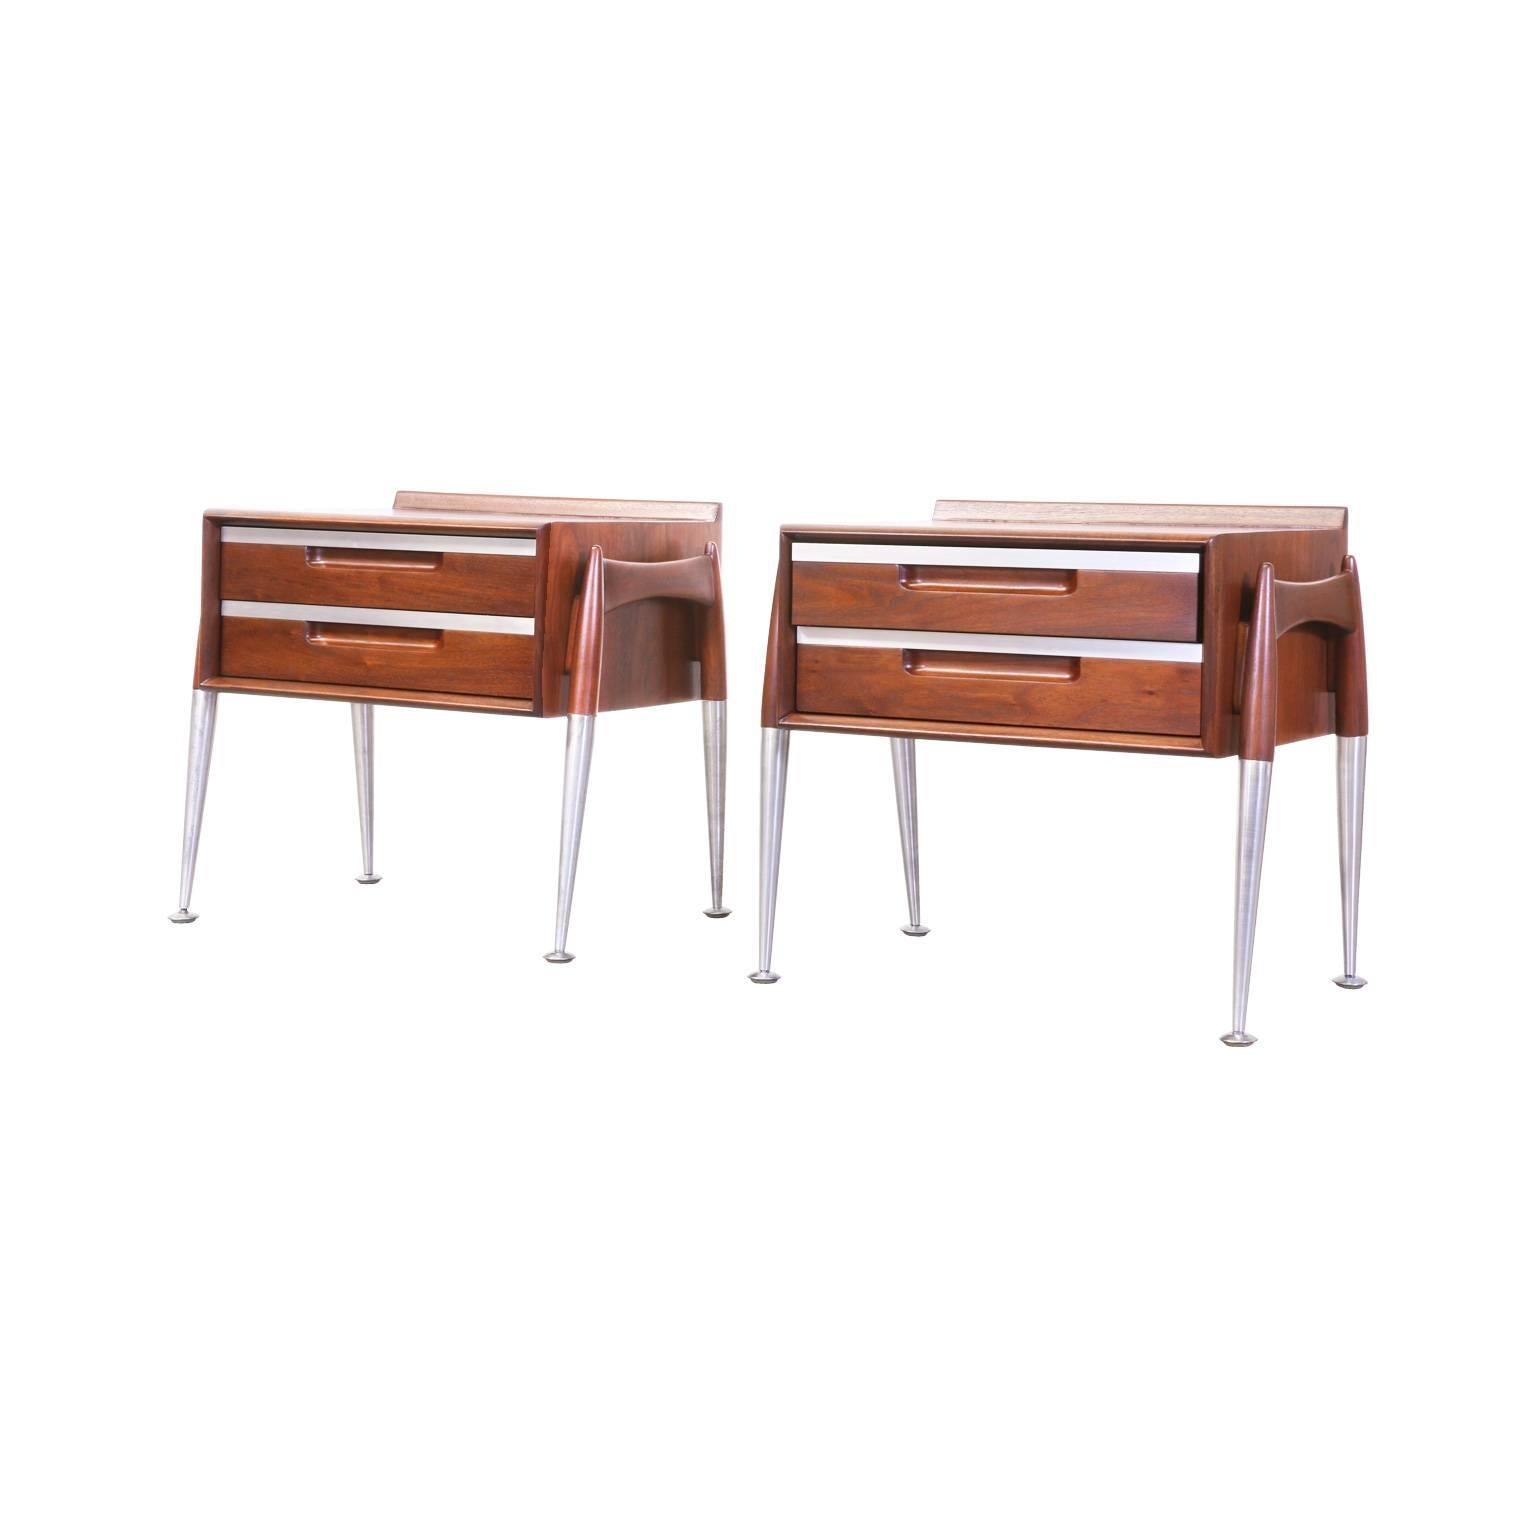 Designer: Unknown
Manufacturer: Unknown
Period/Style: Mid-Century Modern
Country: United States
Date: 1960s

Dimensions: 13.75″H x 23″W x 16″D
Materials: Walnut, Steel
Condition: Excellent – Newly Refinished 
Number of Items: 2
ID Number: